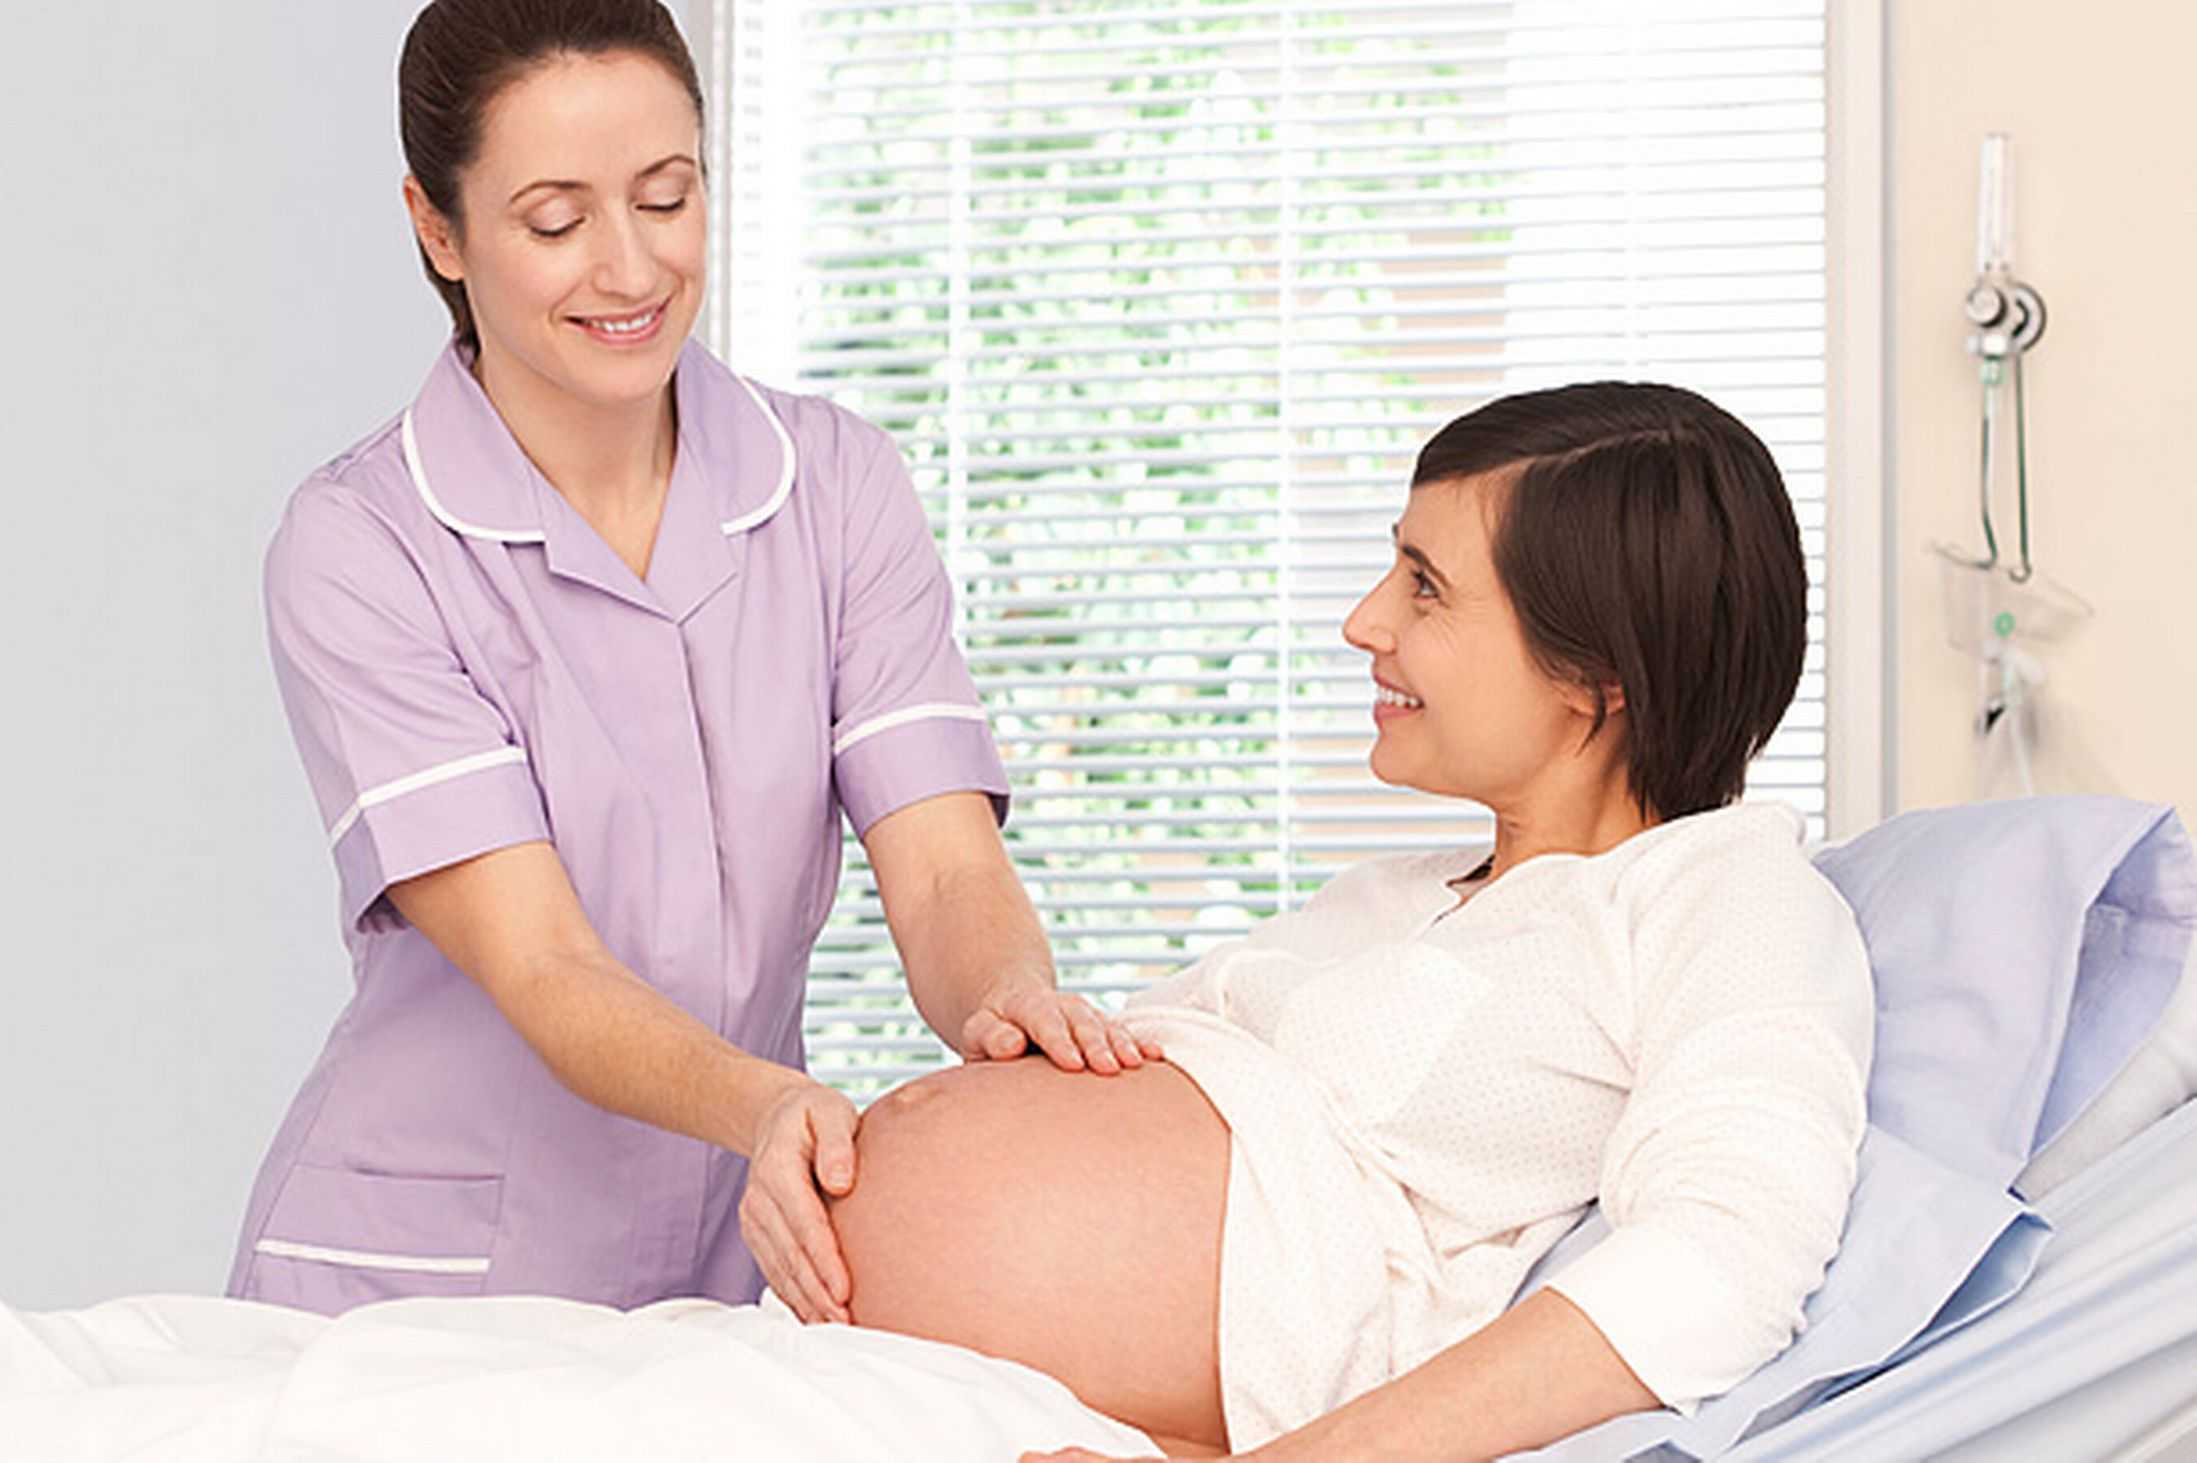 Midwife Essential Info: How to Start a Career 1